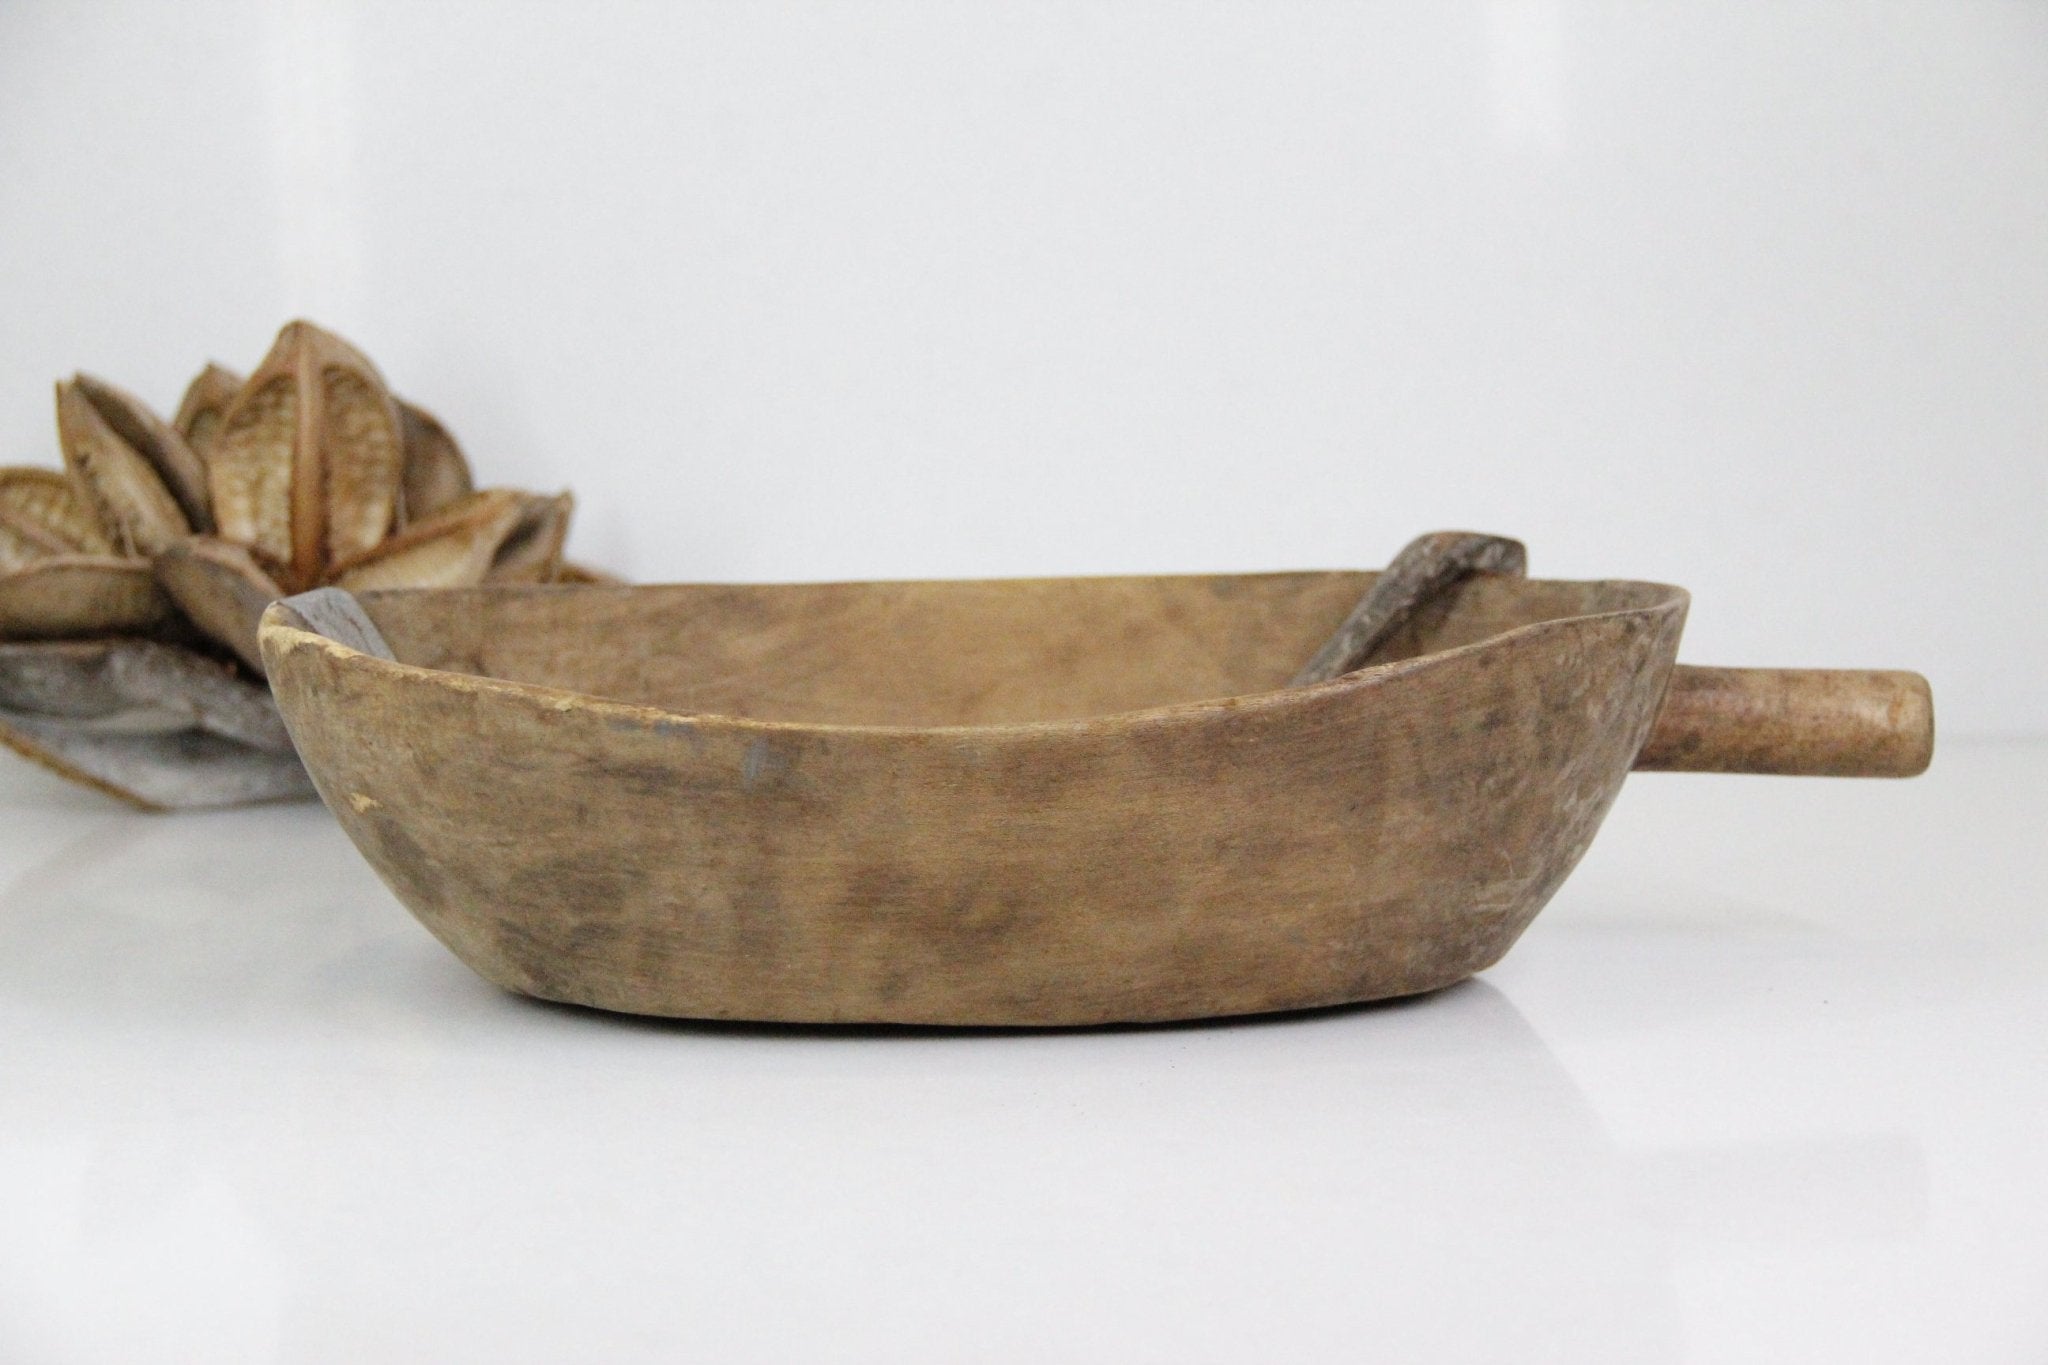 Antique Wooden Bowl With Metal Patch - Debra Hall Lifestyle